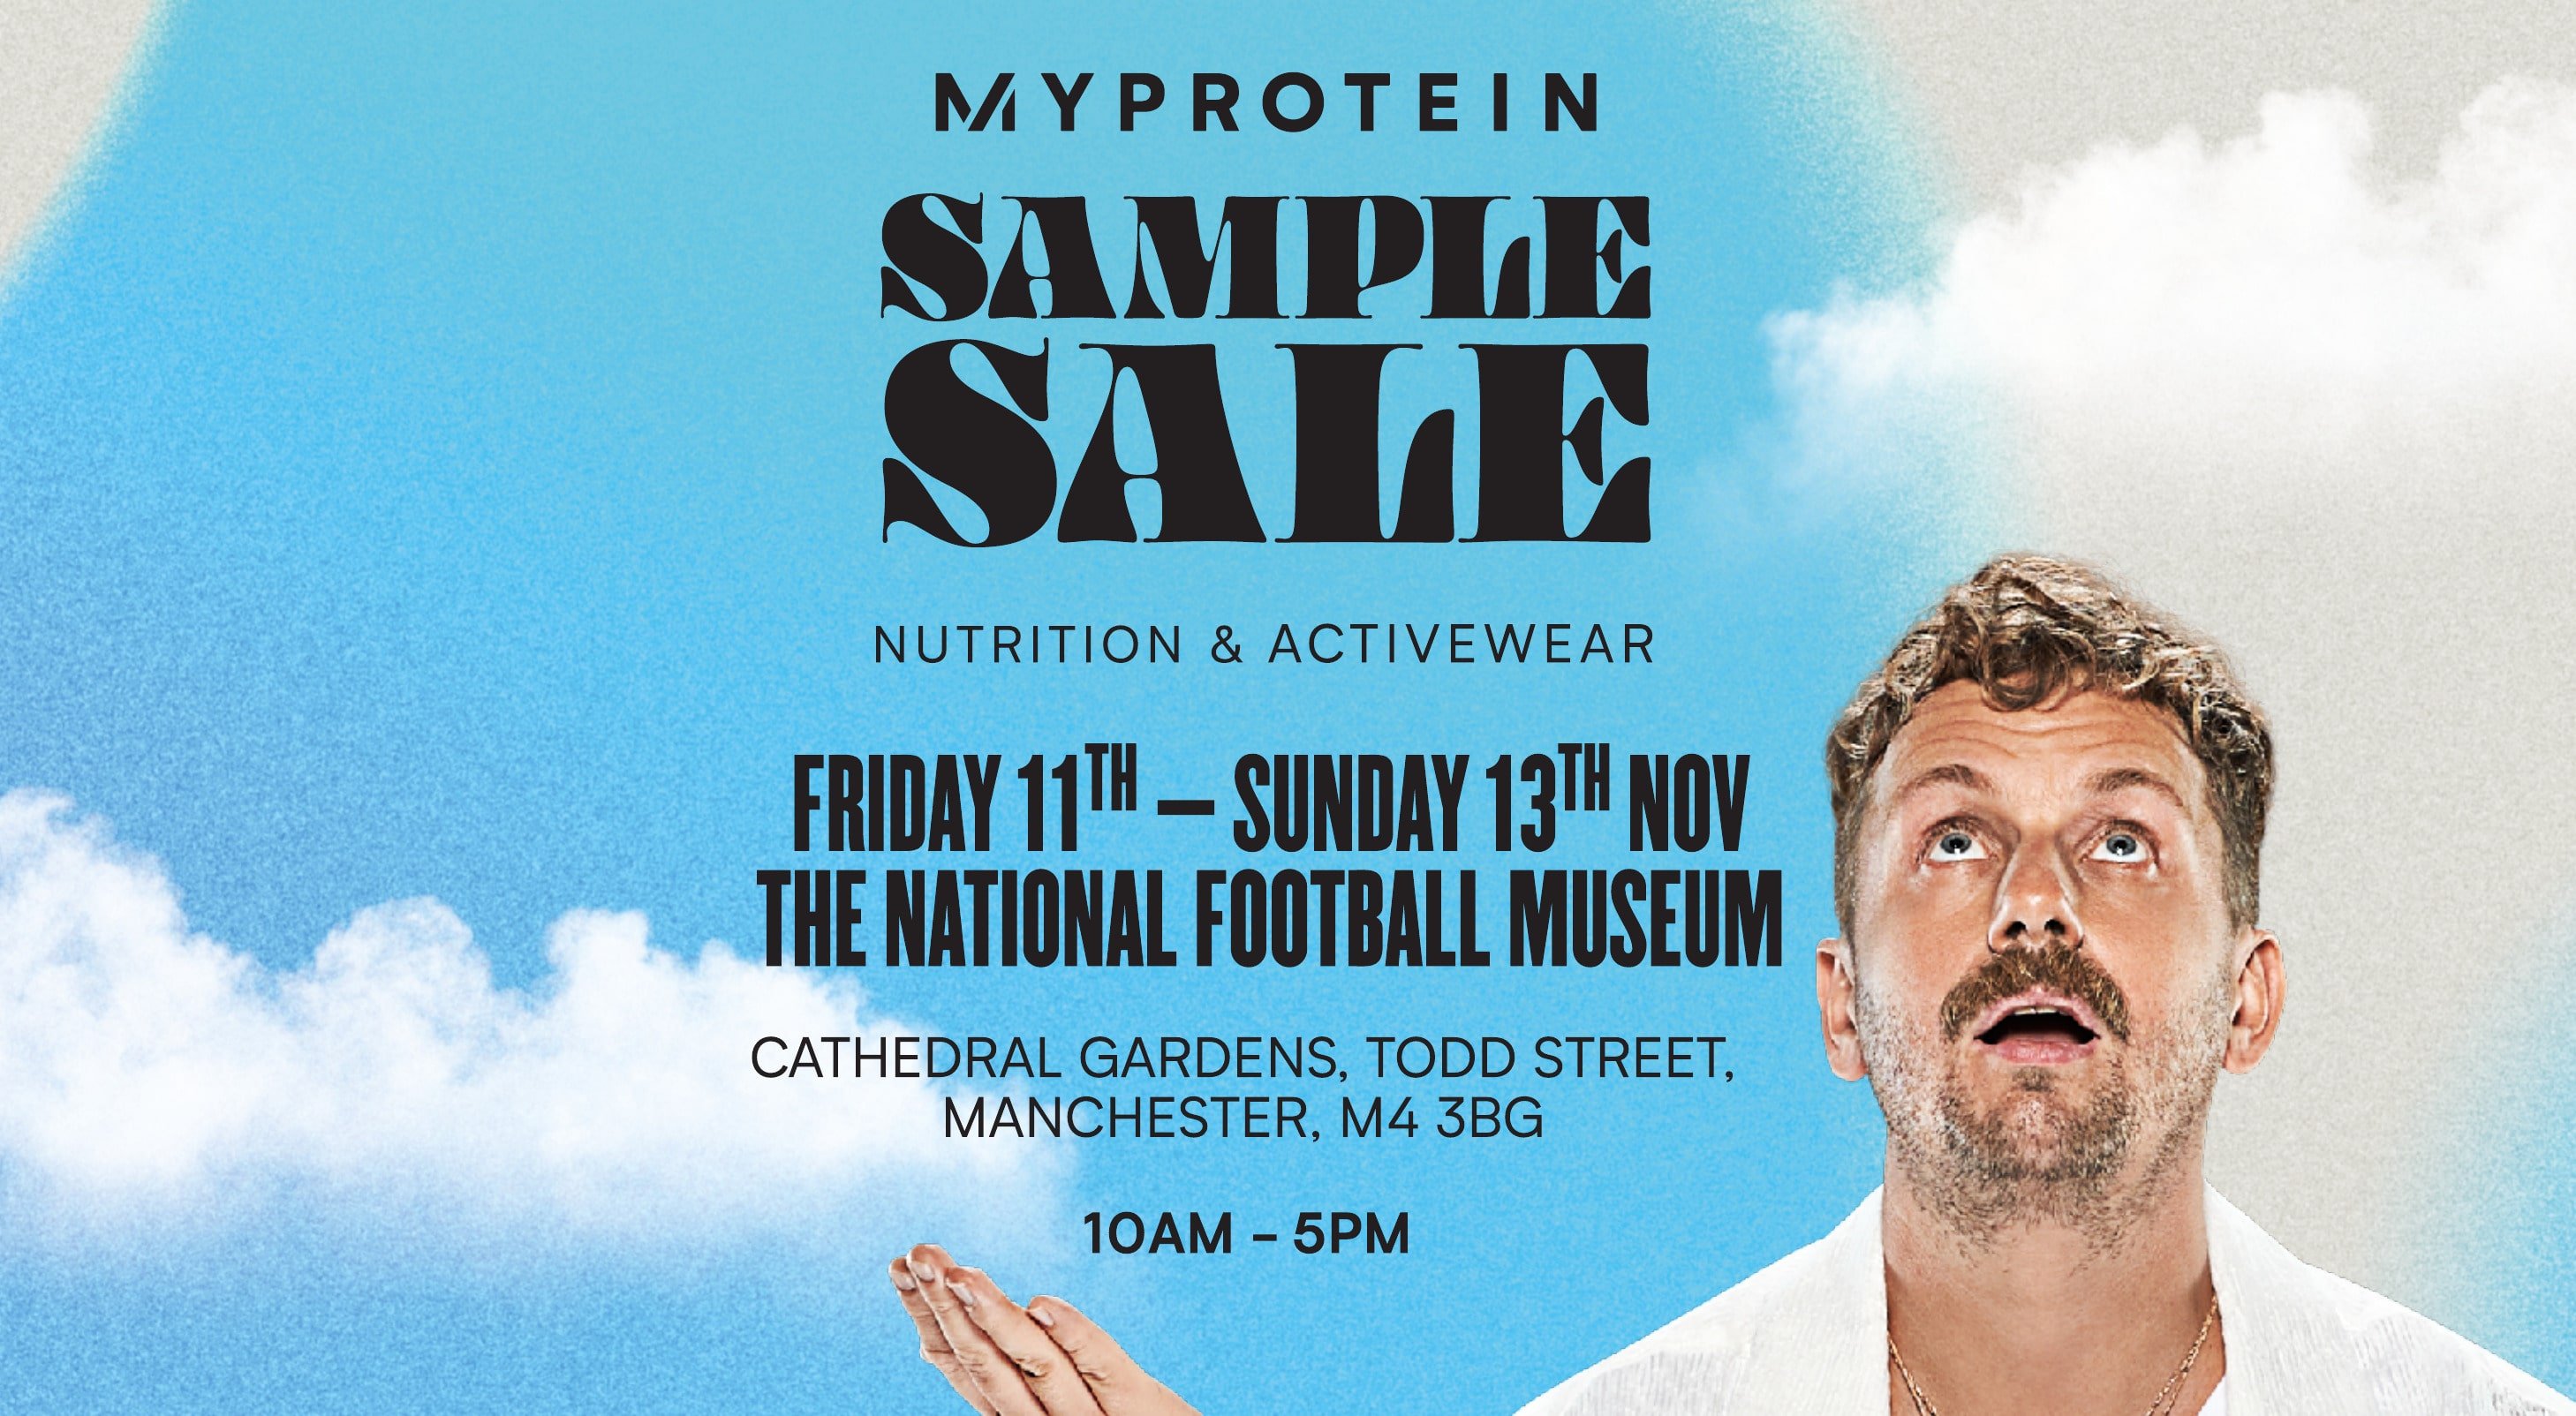 Myprotein’s First Ever Sample Sale Event | Browse Incredible Deals IRL